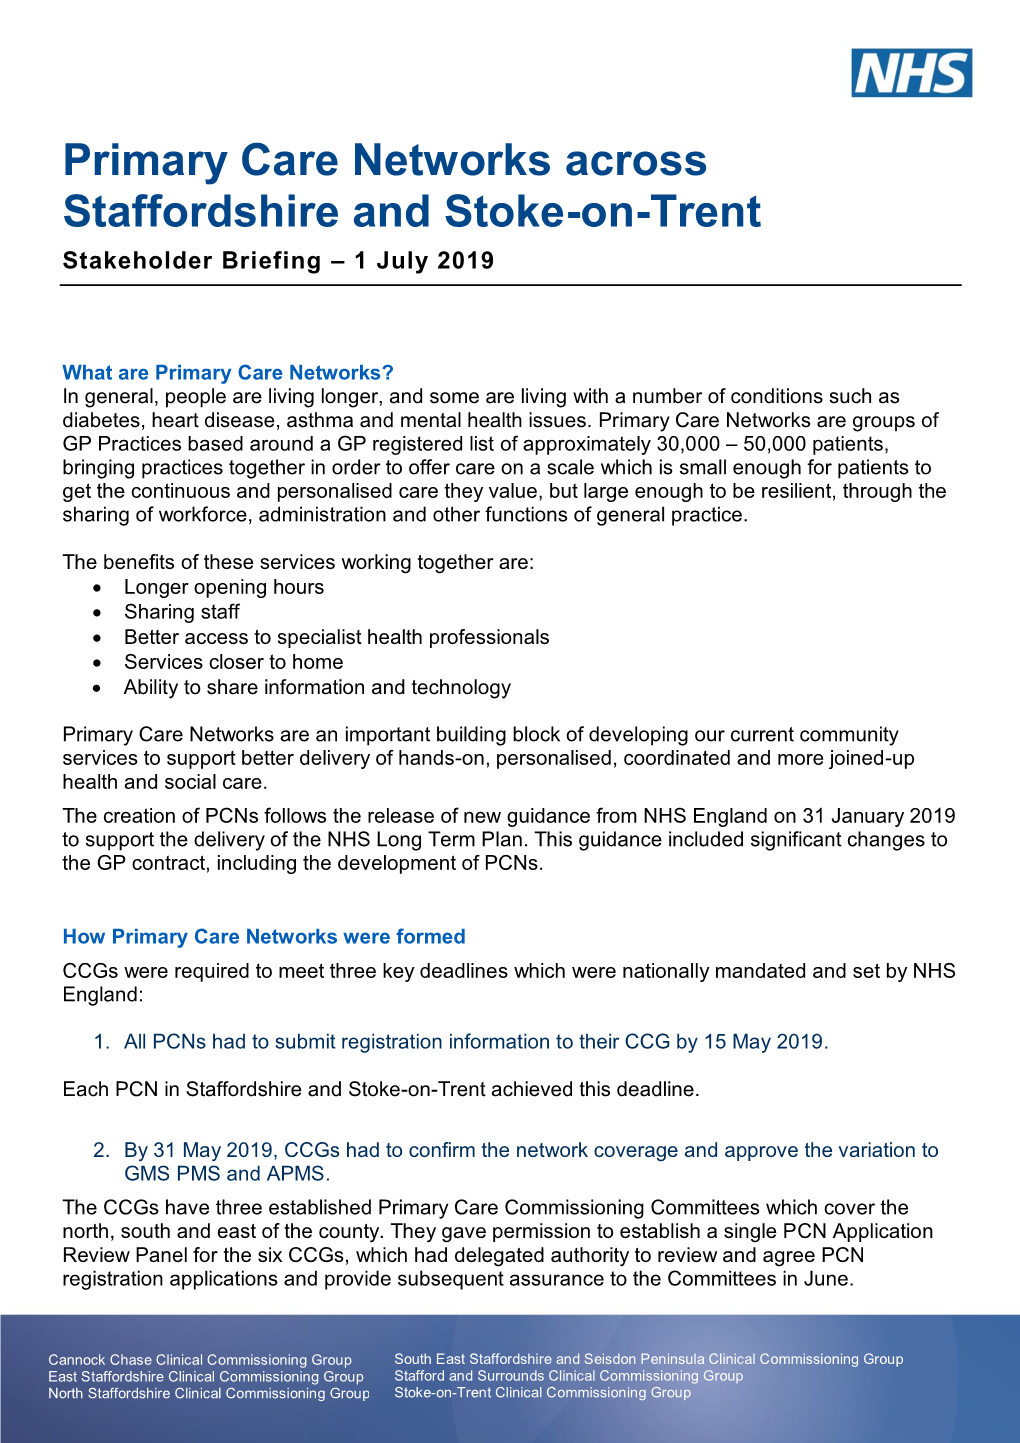 Primary Care Networks Across Staffordshire and Stoke-On-Trent Stakeholder Briefing – 1 July 2019